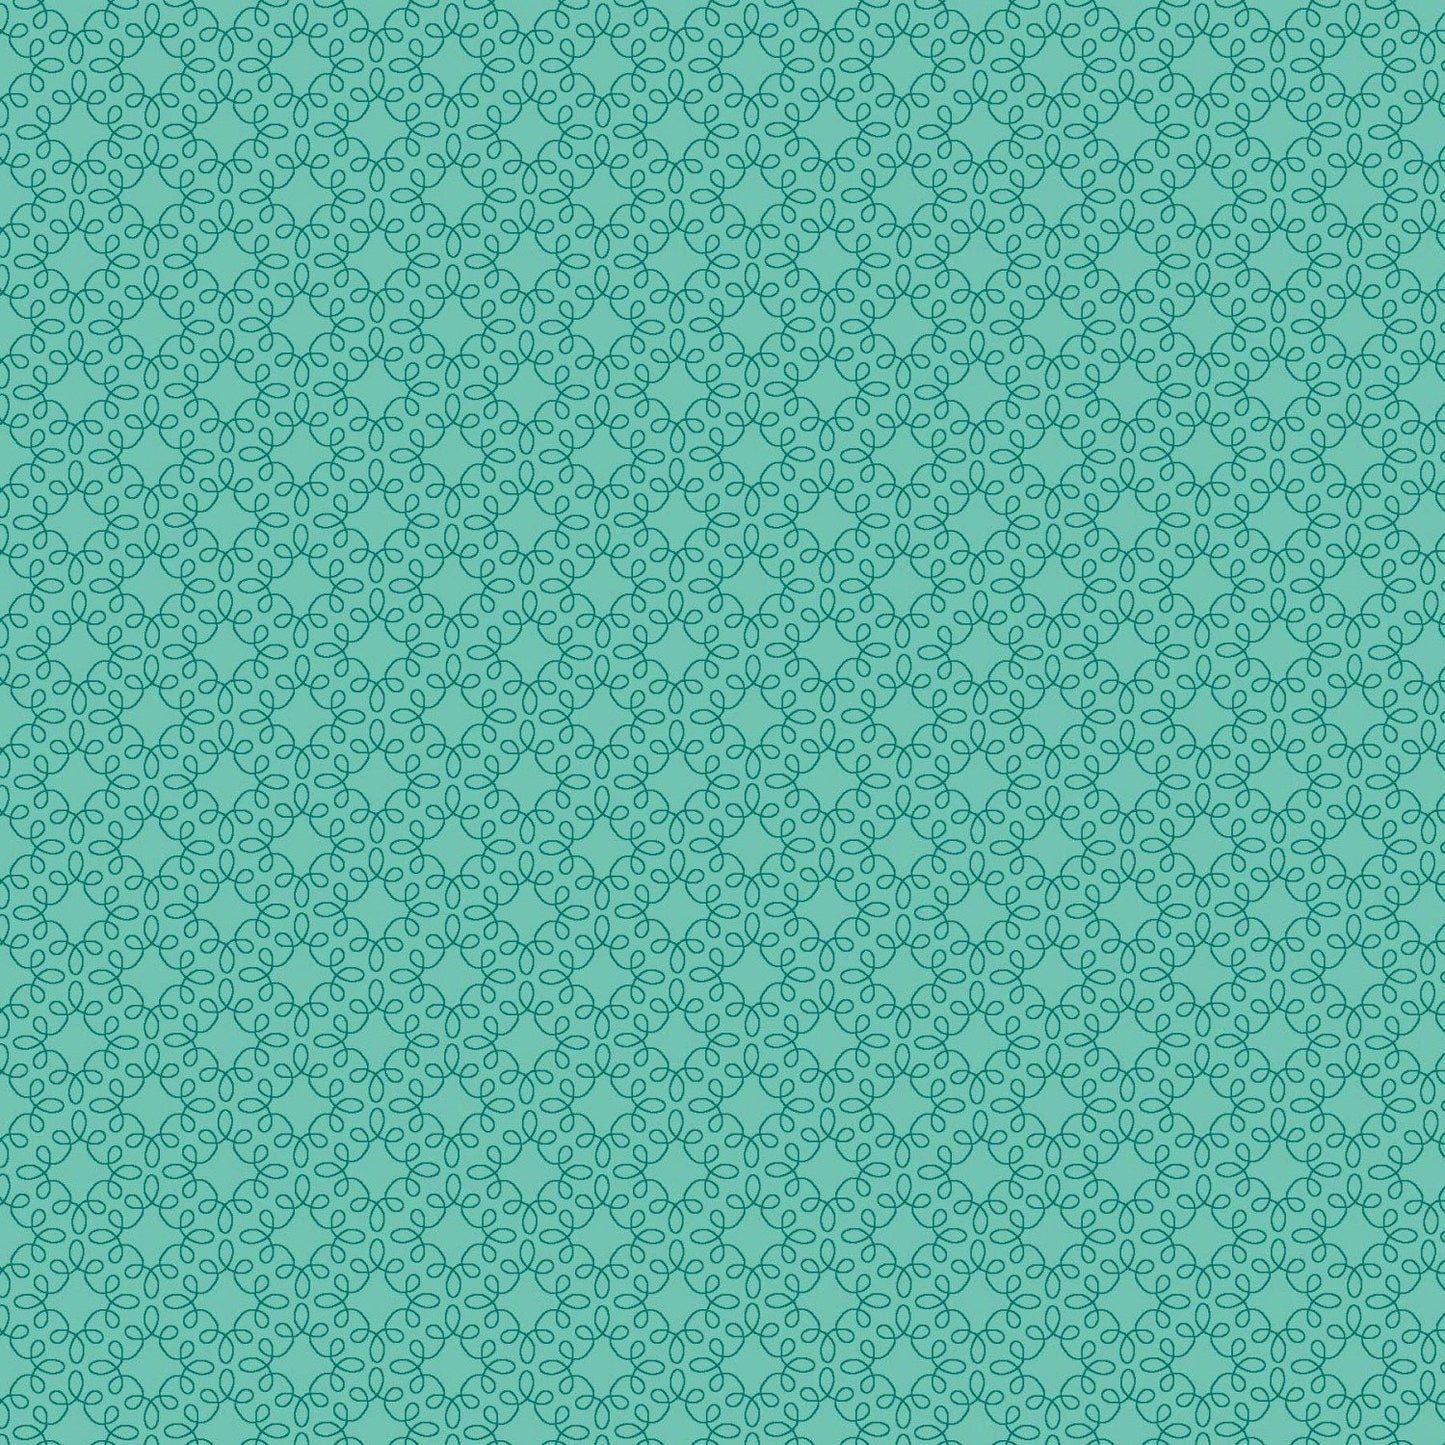 Henry Glass Fabric FQ (18"x21") Modern Melody Basics in Teal, Cotton Blender Fabric by Henry Glass